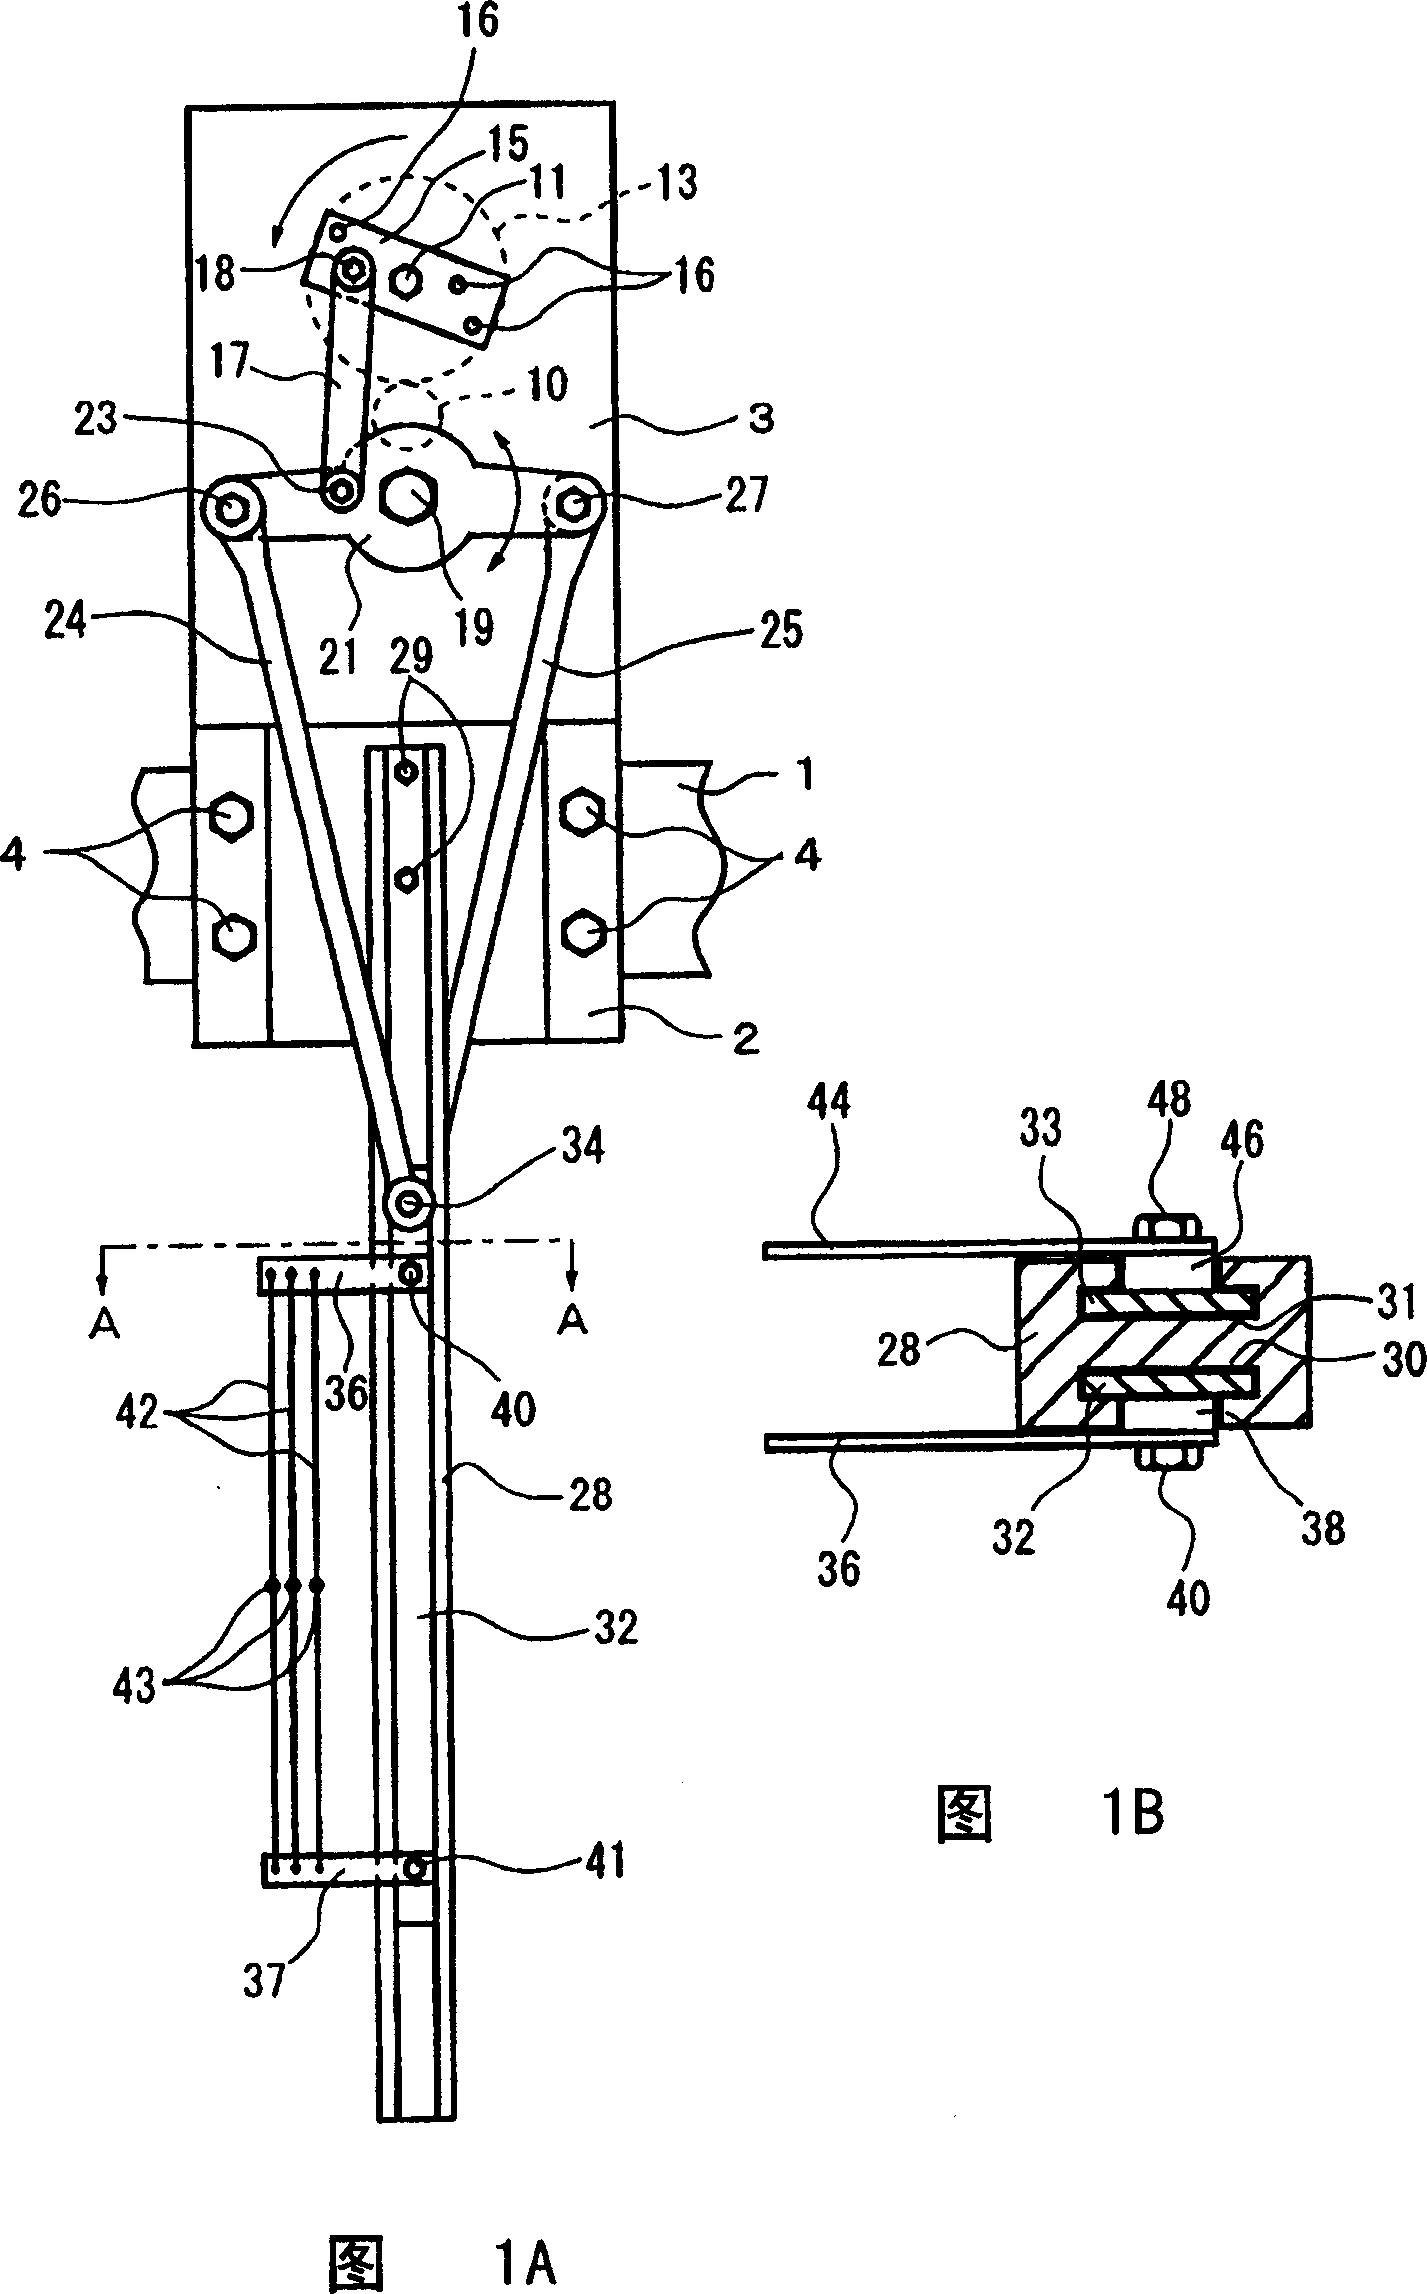 Device using for opening selvedge line of loom